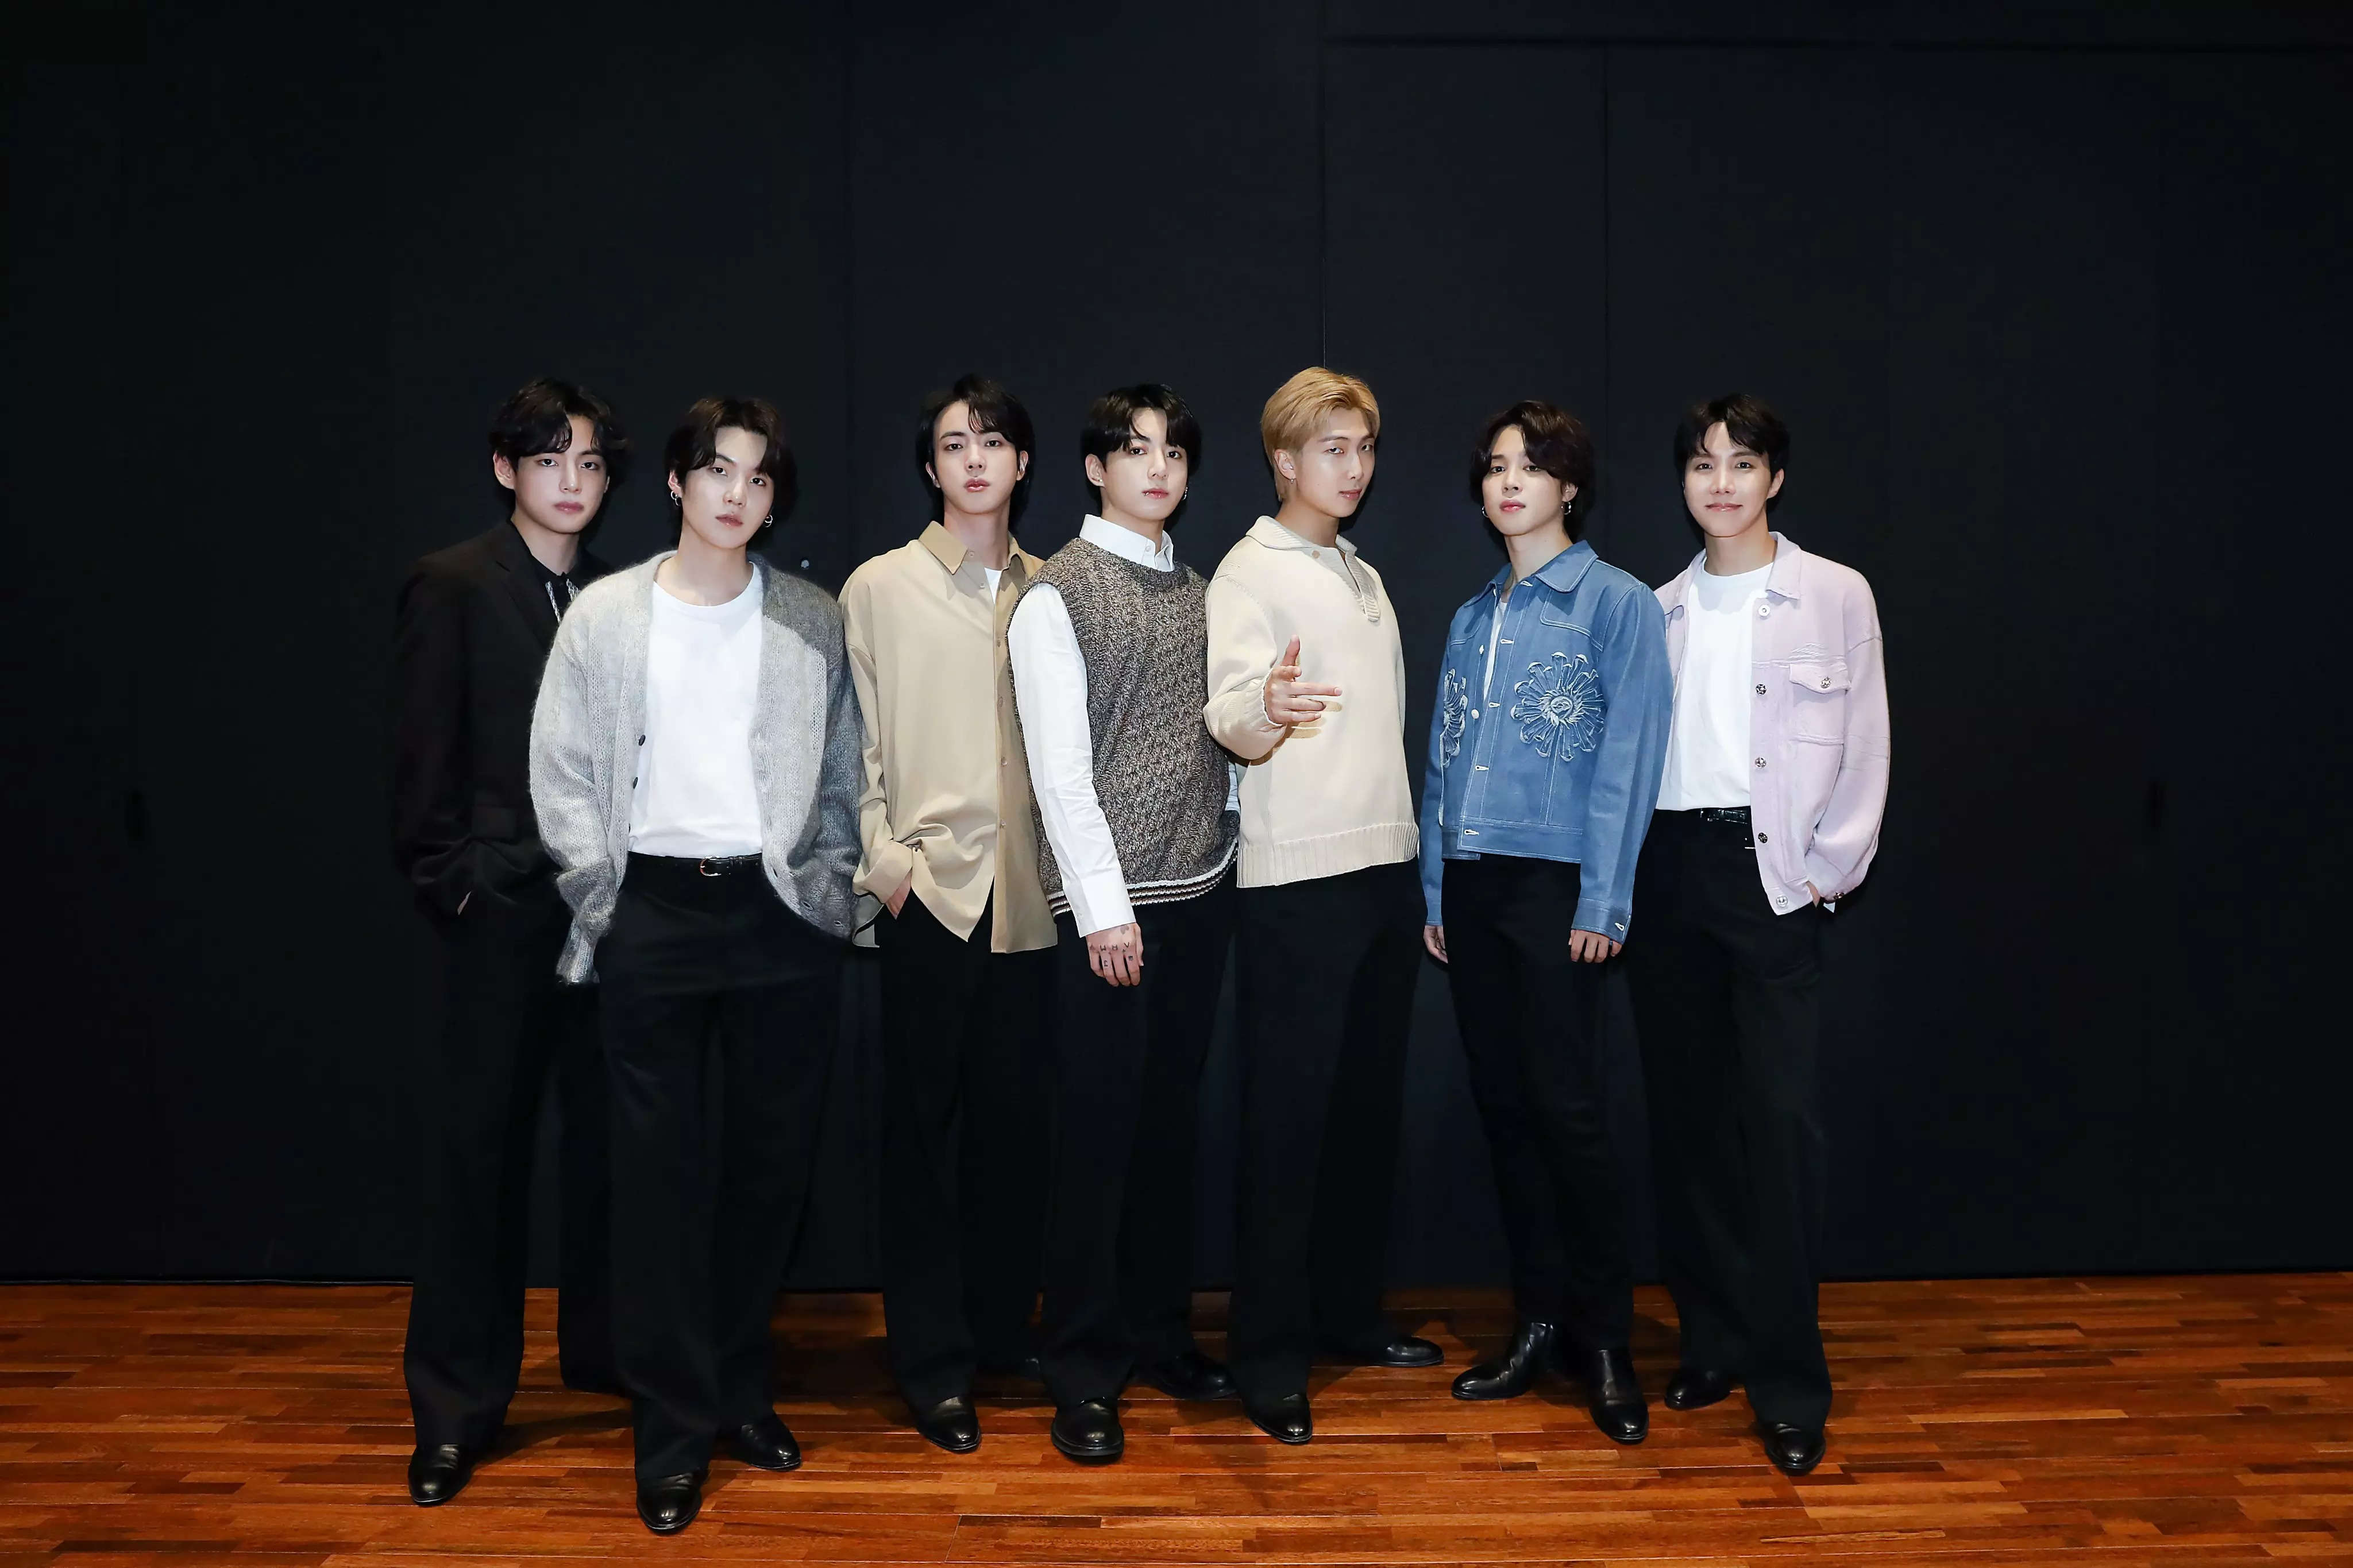 BTS in Coordinated Black Suits: Grammy 2019 Red Carpet Style – Footwear News